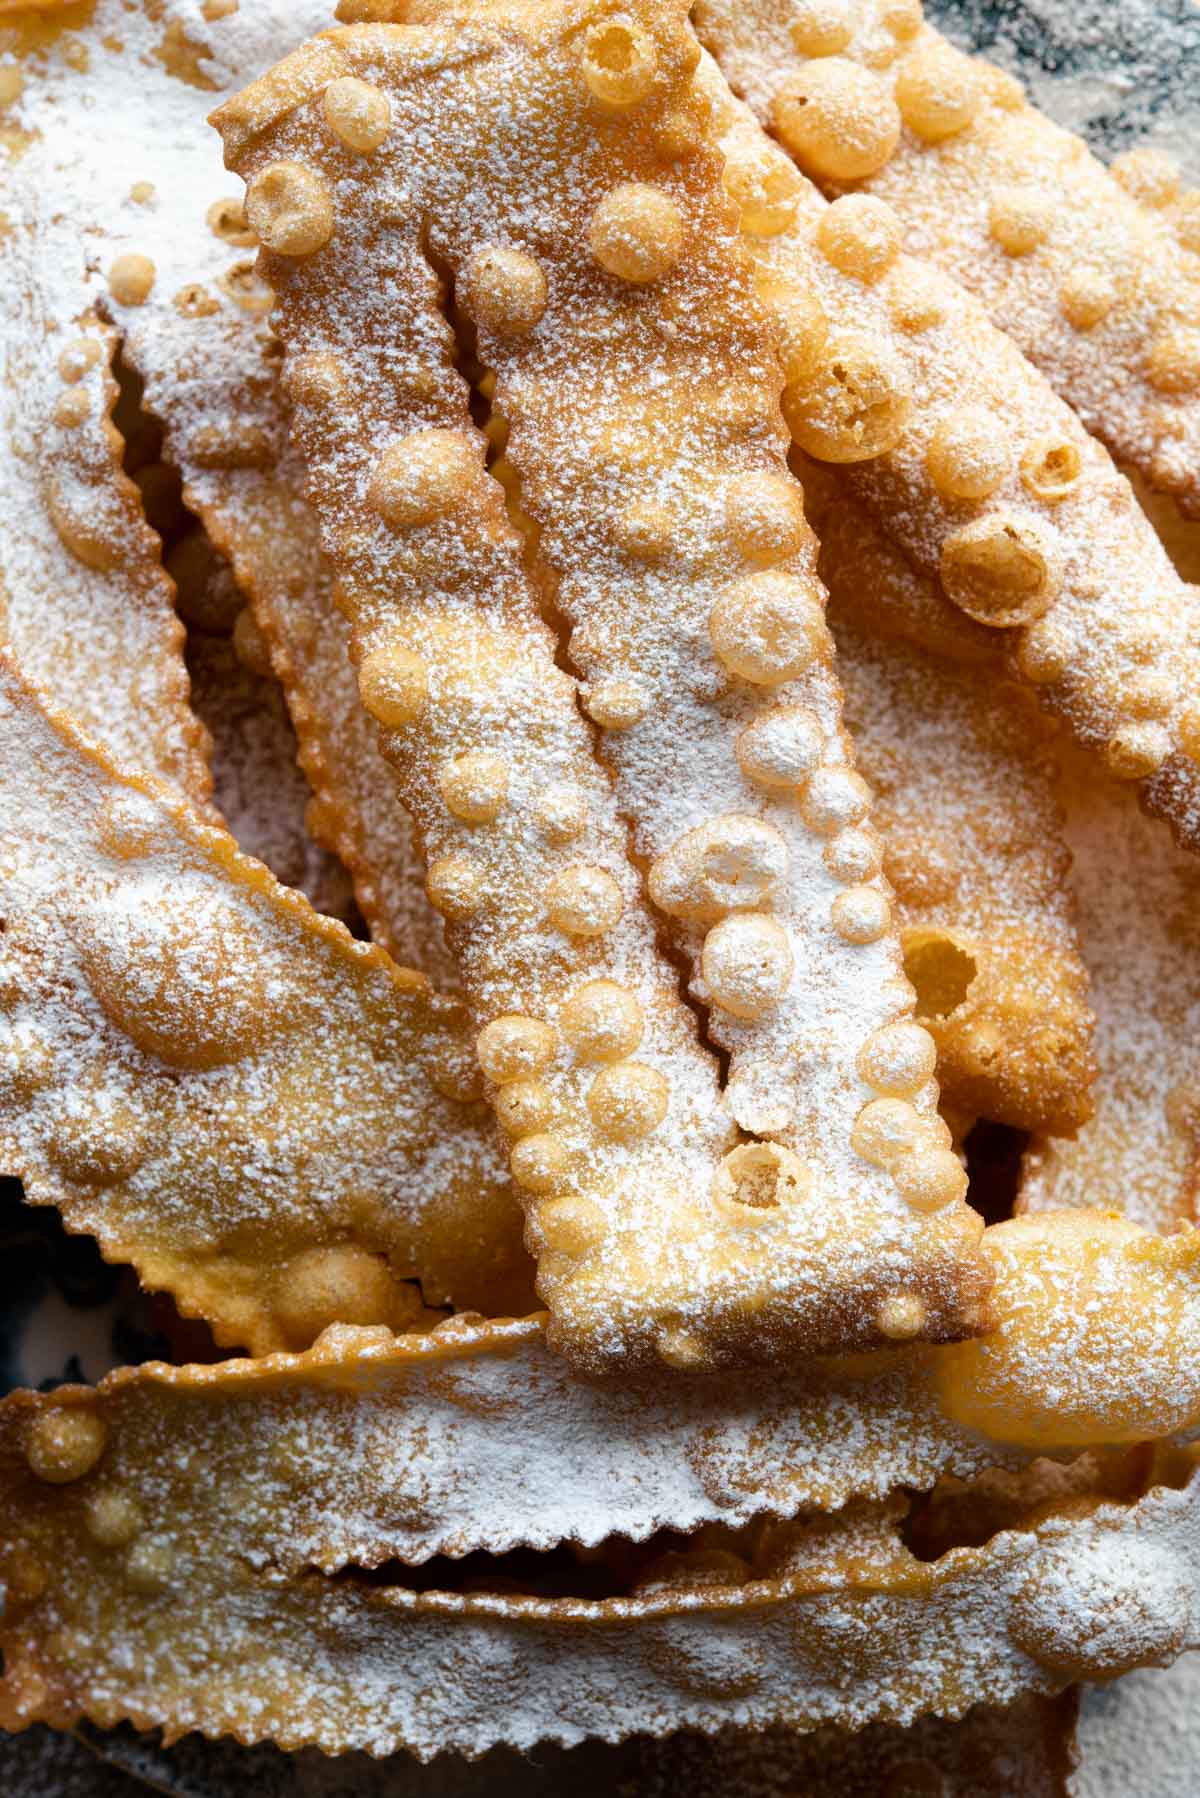 A close up of an Italian fried pastry dusted in powdered sugar